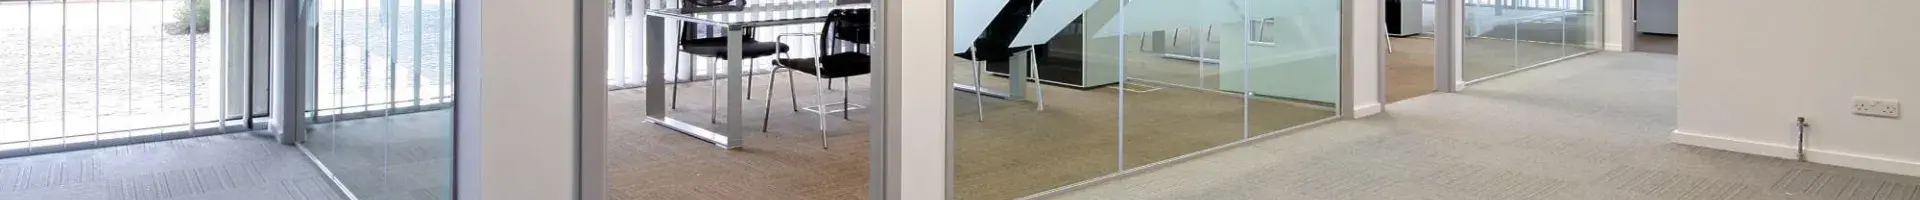 Carpet Close Up in a Commercial Building and an Office with Glass Walls